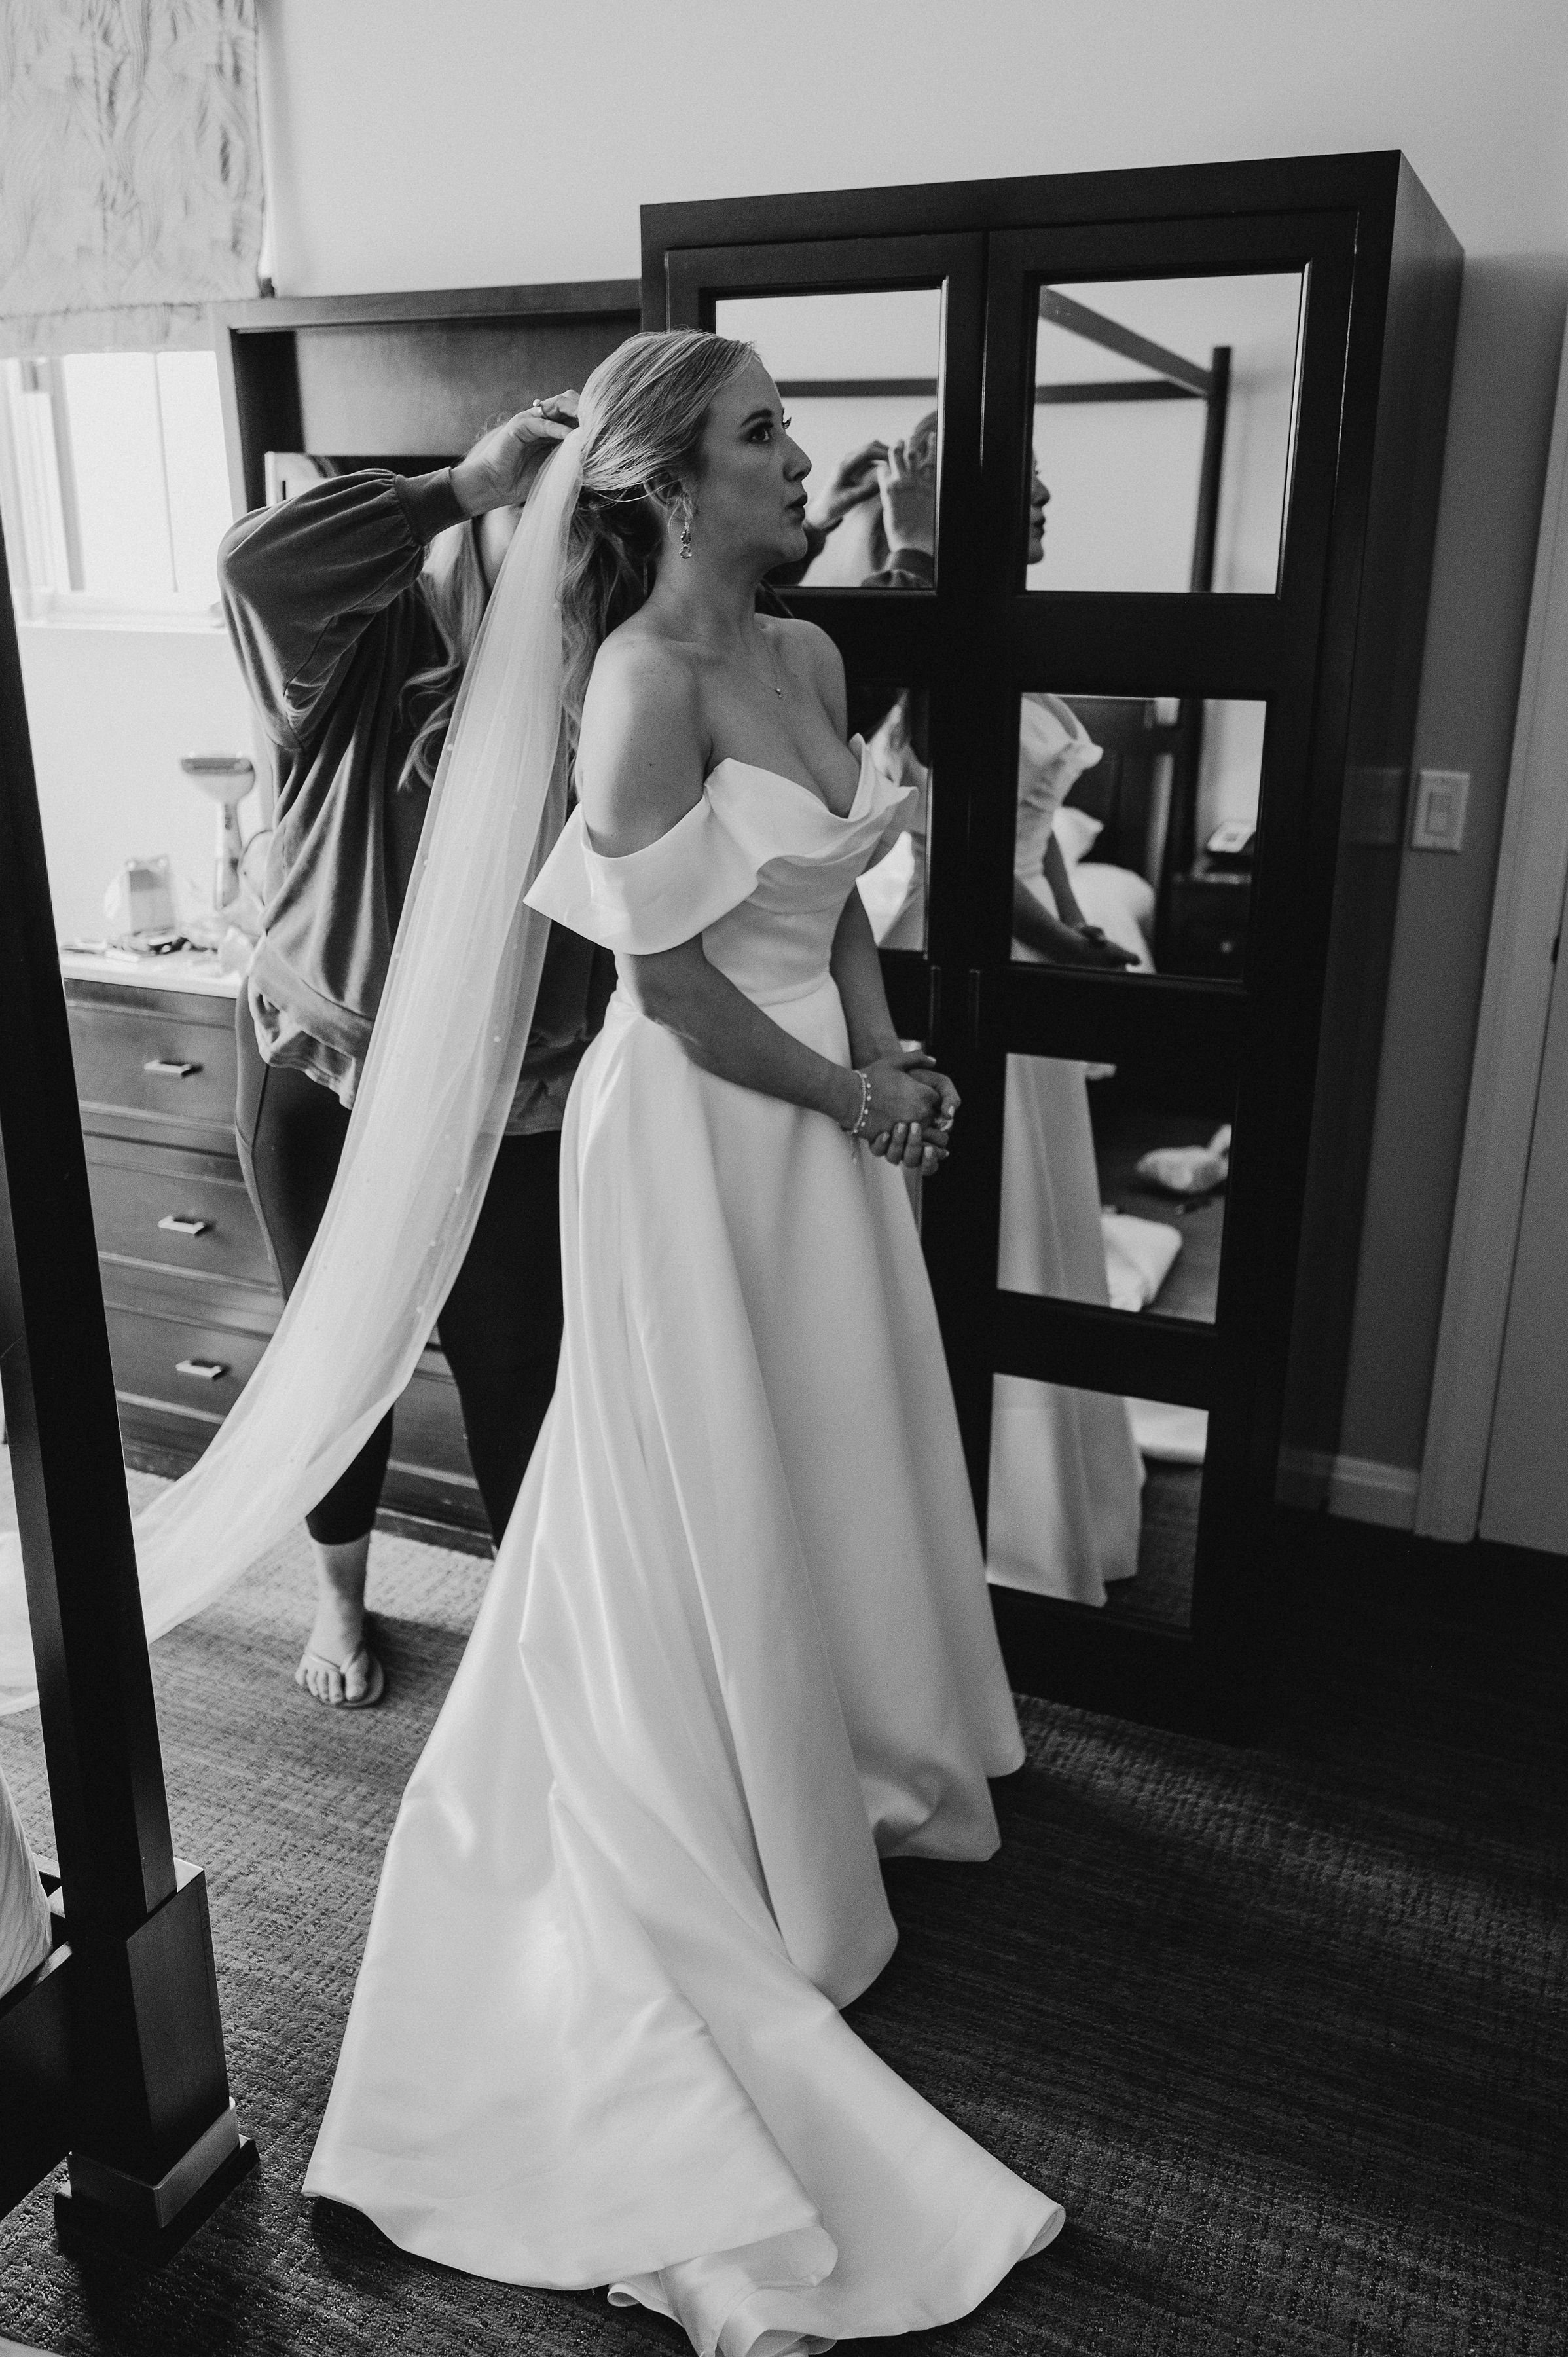 lebelle-hera-couture-wedding-dress-alison-and-kevin-wedding_02.jpg